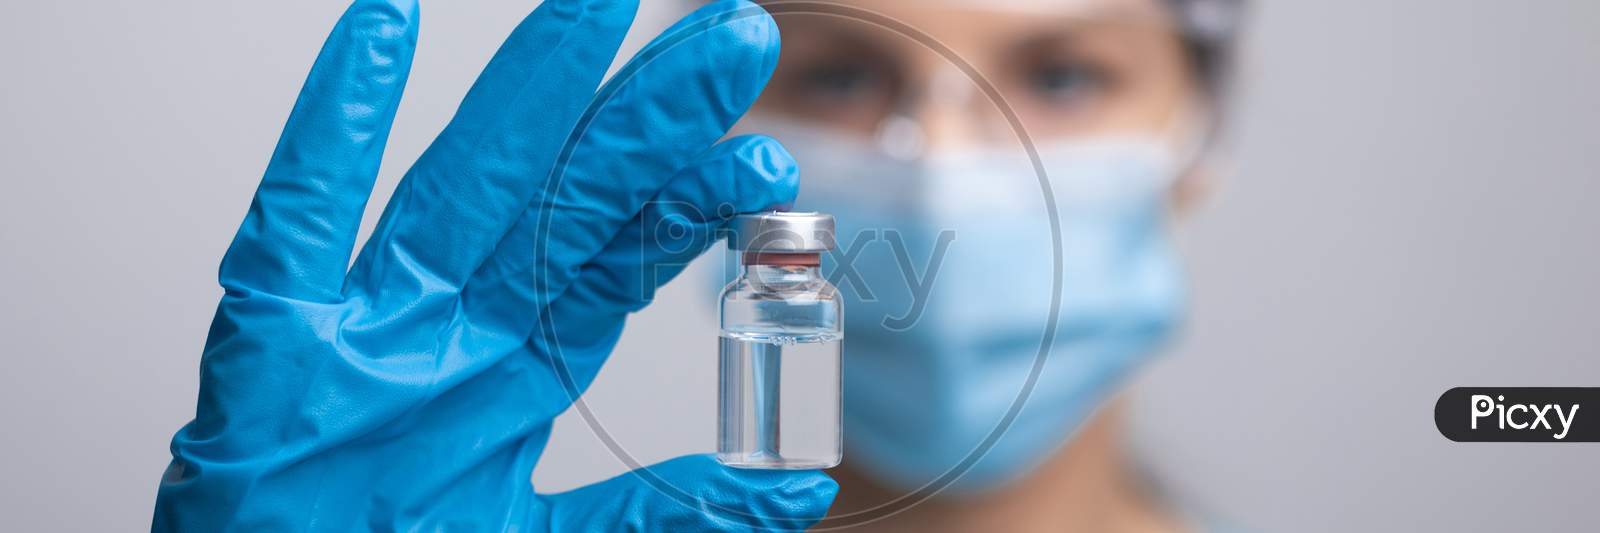 Doctor Scientis In Protective Gloves And Mask Holding Glass Vial With Injection Liquid. Vaccination Against Influenza And Coronavirus.